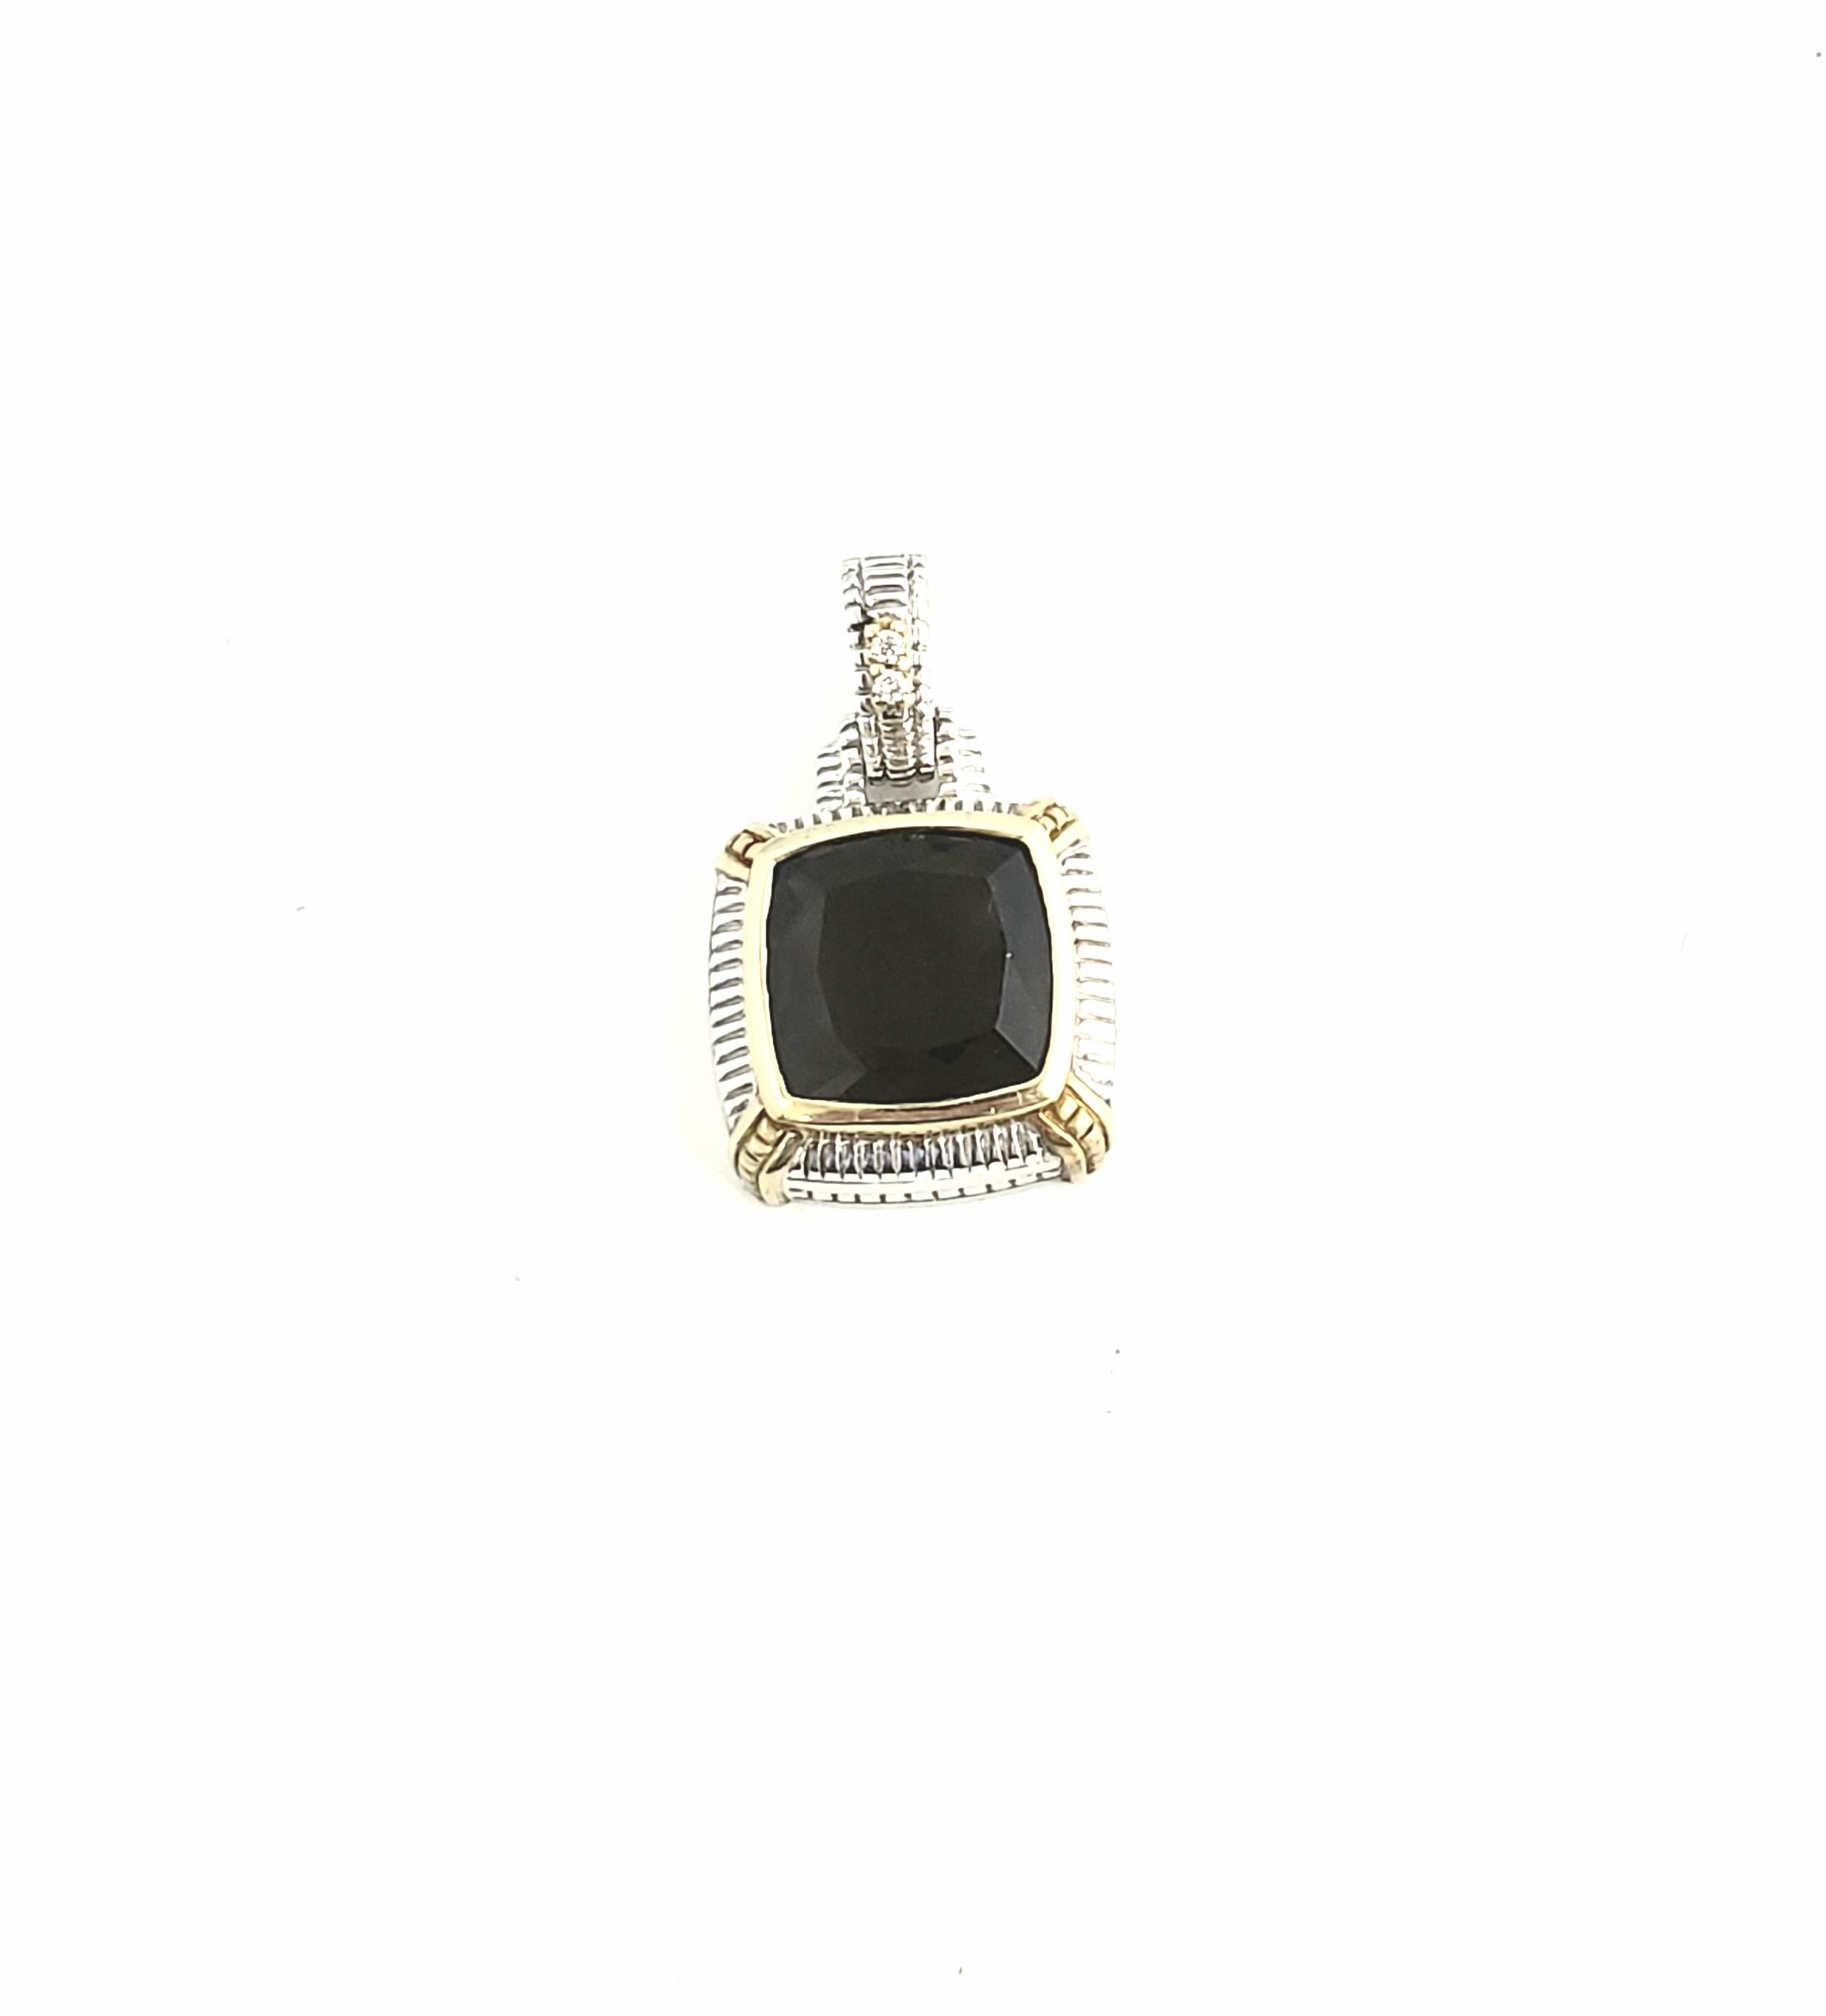 Judith Ripka Two Sterling Silver 18K Diamond Smokey Topaz Enhancer Pendant

This is a stunning Two Sterling silver and 18K yellow gold diamond smokey topaz enhancer pendant. 

Measurements:  29mm L x 16mm W.  7mm thick.  Stone measures 10mmL x 10mm